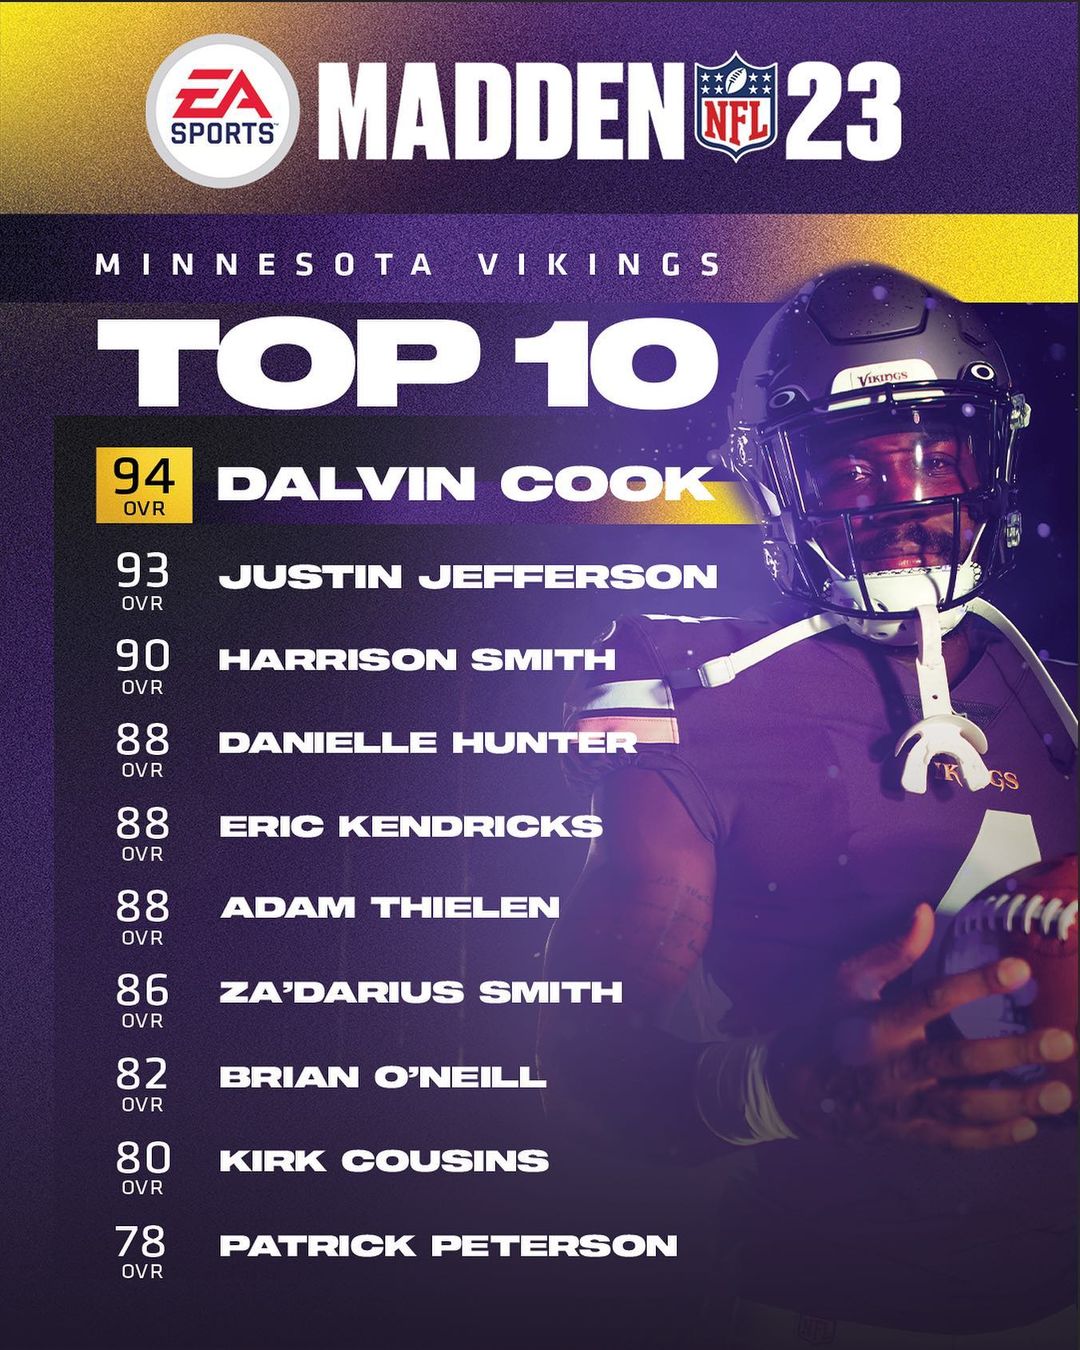 @dalvincook leading the way #Madden23...